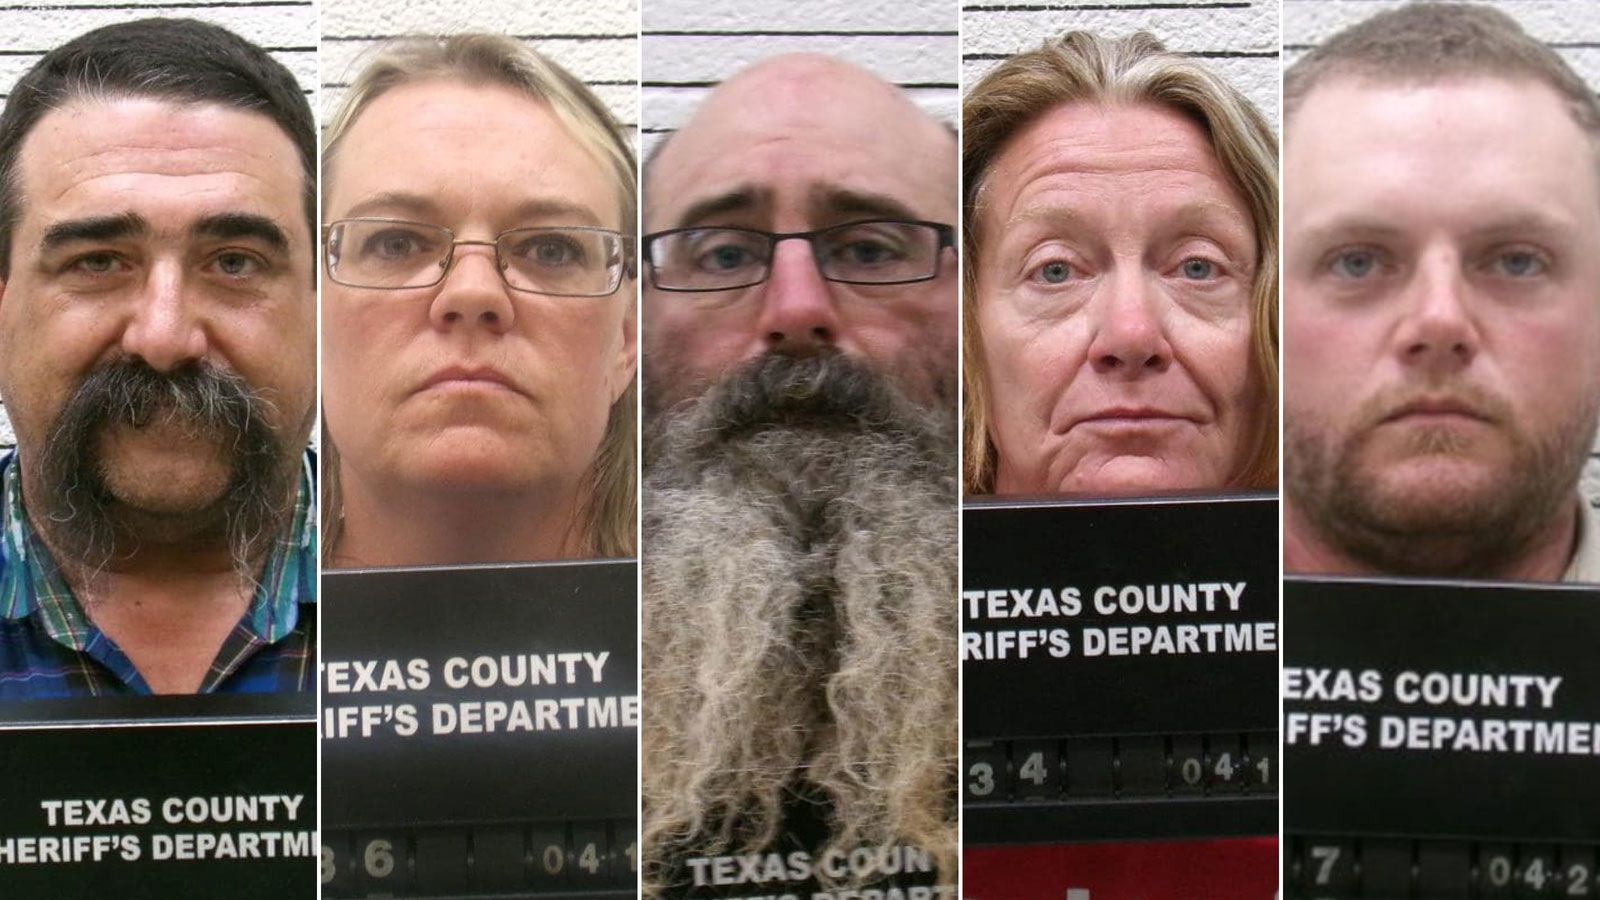  From left, Cole Earl Twombly, Cora Twombly, Tad Bert Cullum, Tifany Machel Adams and Paul Grice are pictured in a split image. (Oklahoma State Bureau of Investigation)